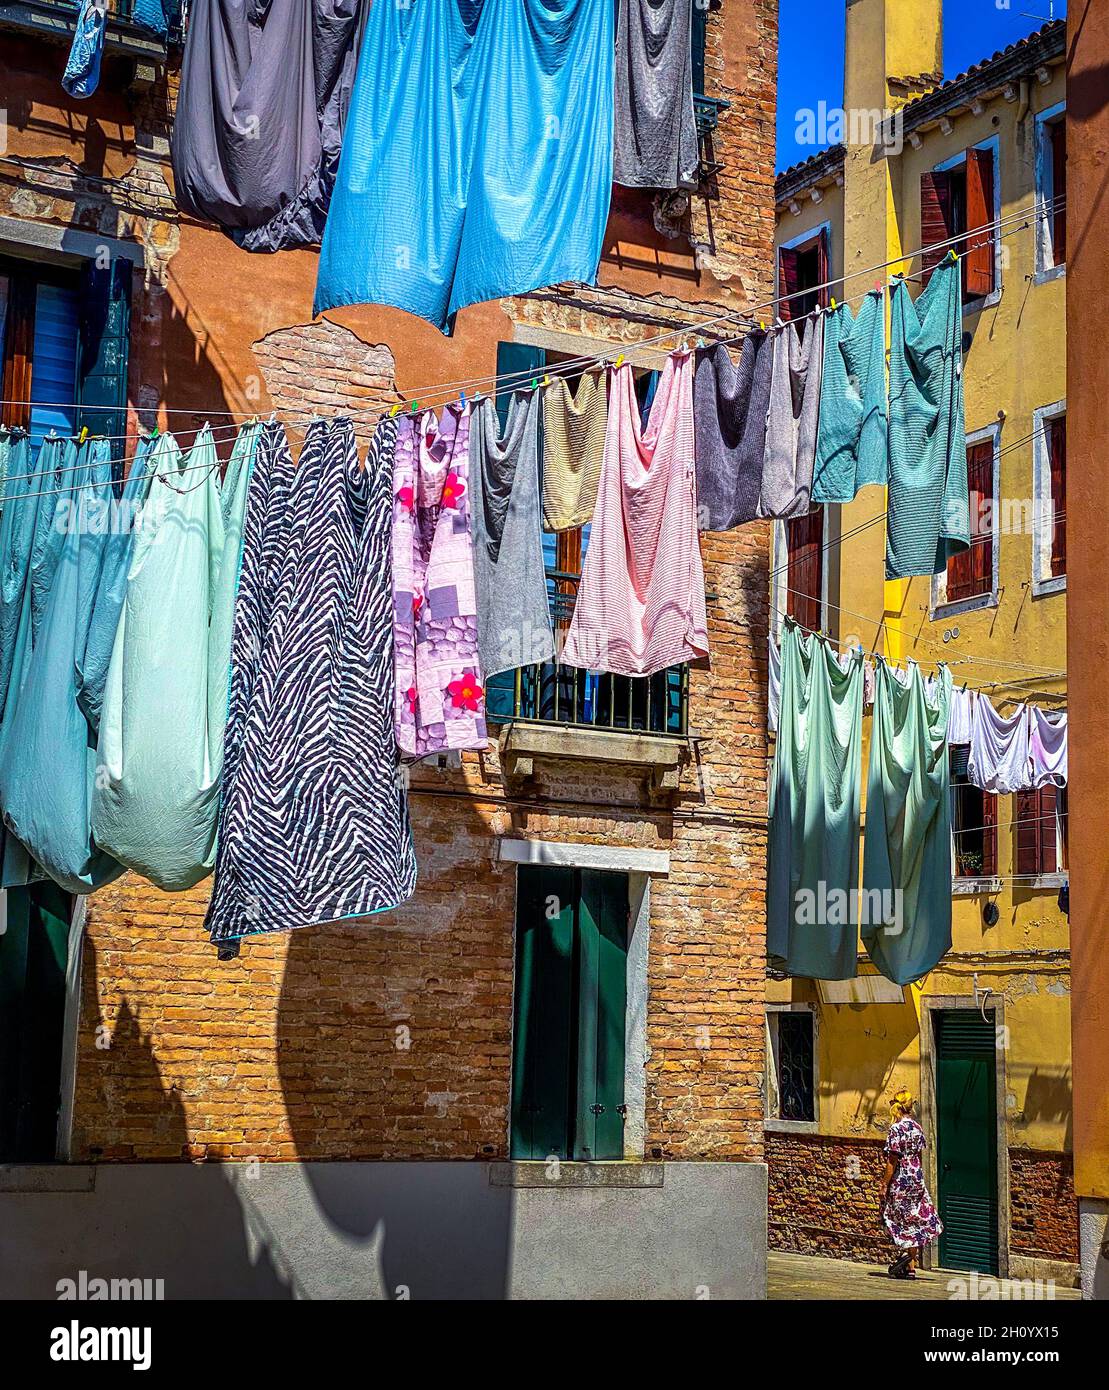 Woman walking under Hanging clothes put to dry on a small traditional street of Venice, Italy. Travel background Stock Photo